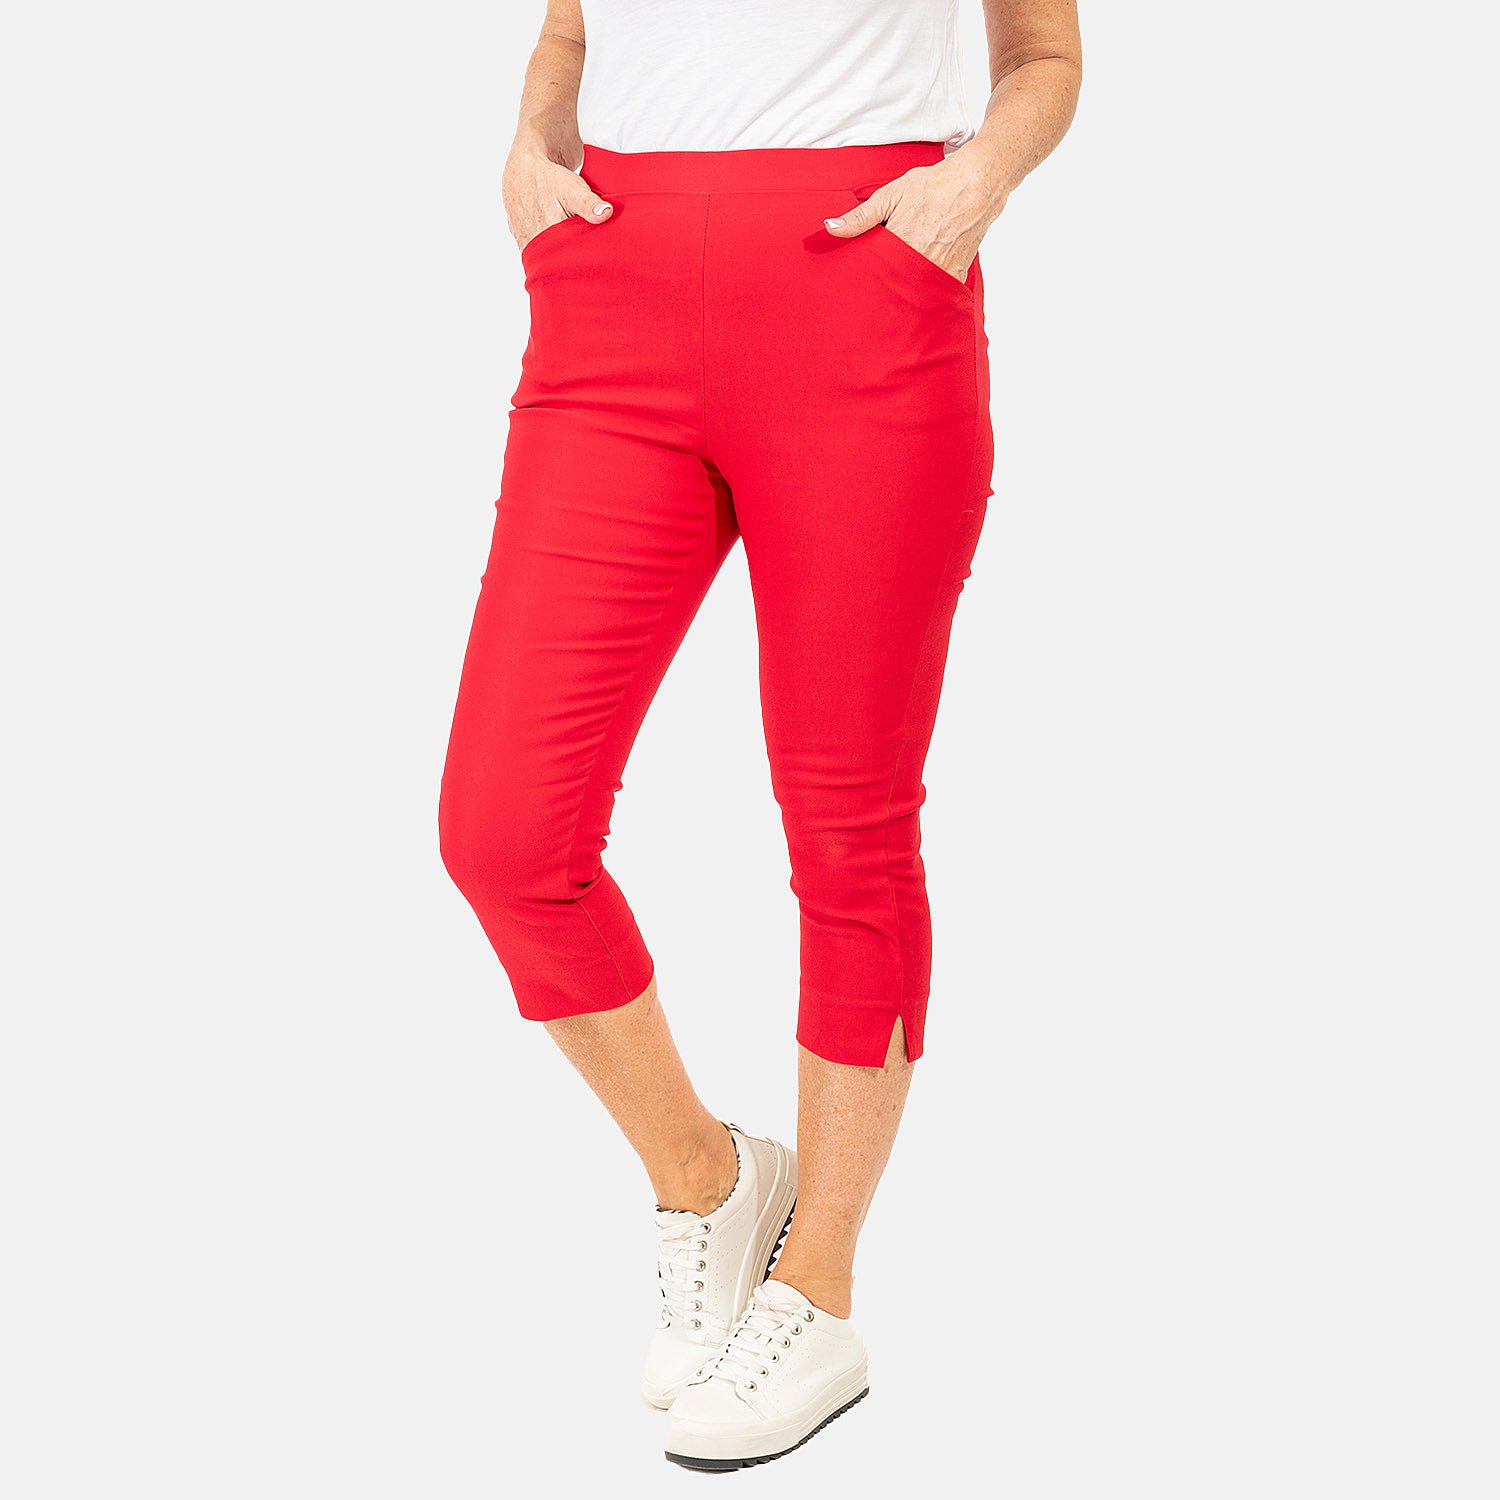 Viscose-Jean-and-Pant-Trouser-Size-1x1-cm-Red